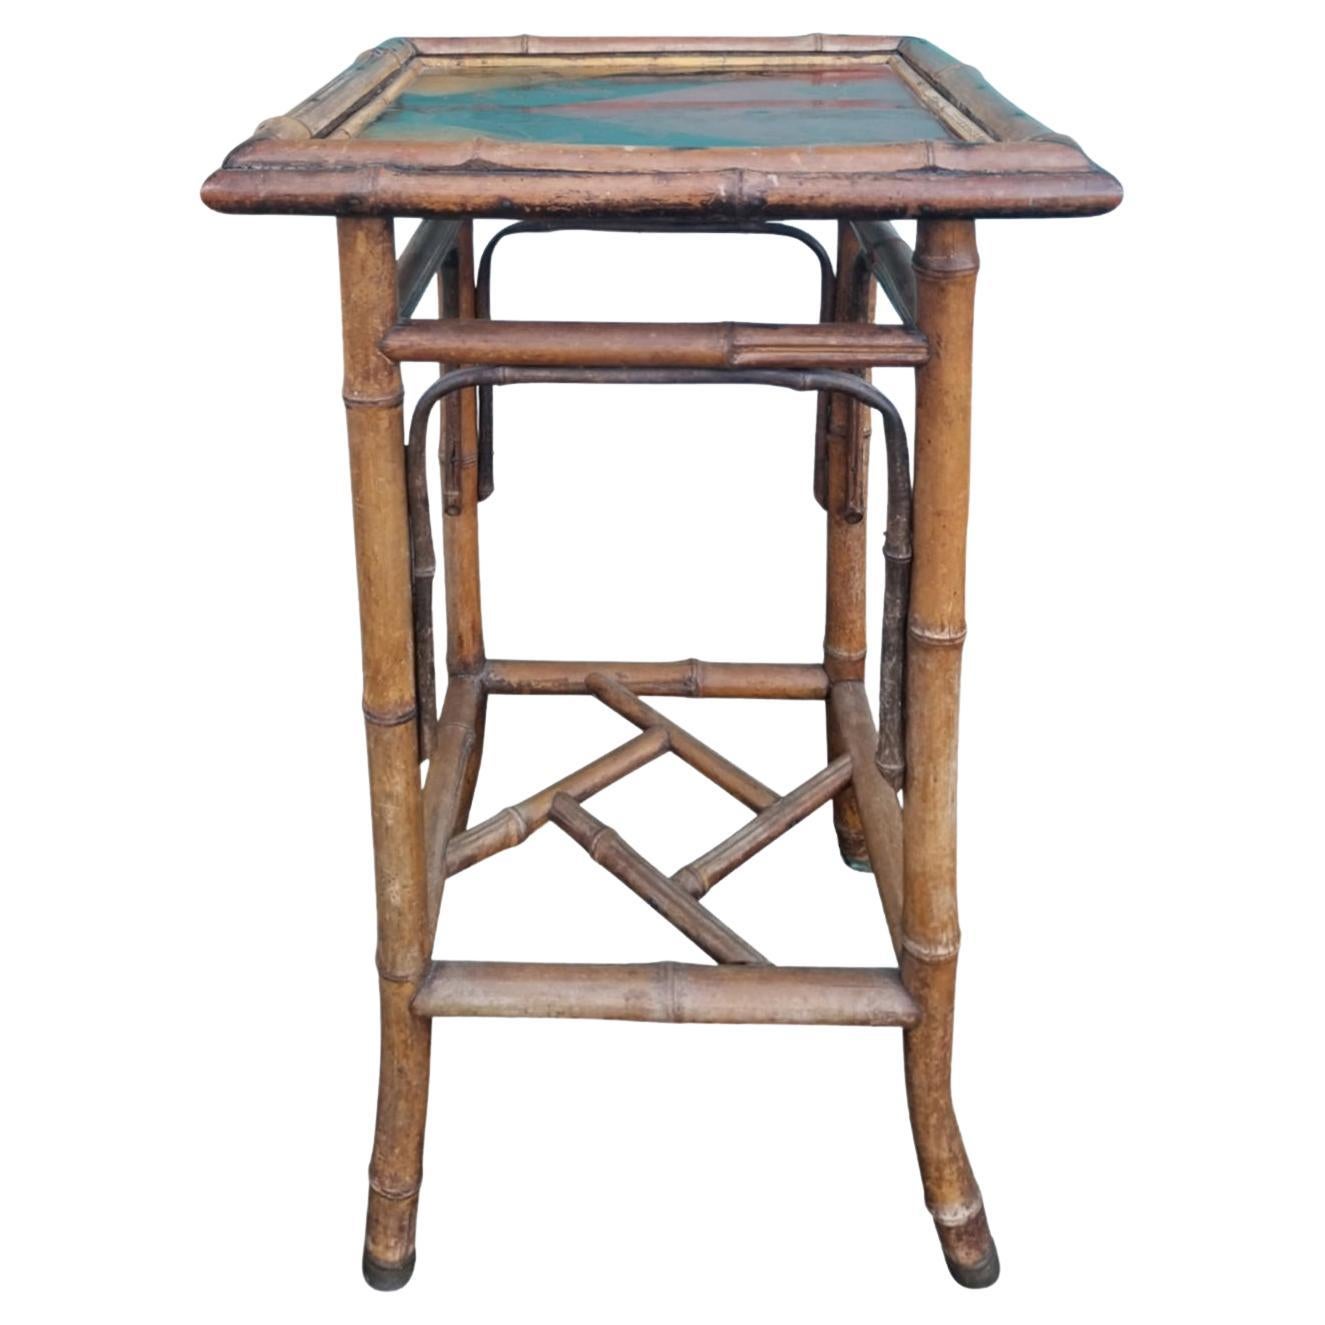 Charming 19th Century Bamboo Square Drink Table